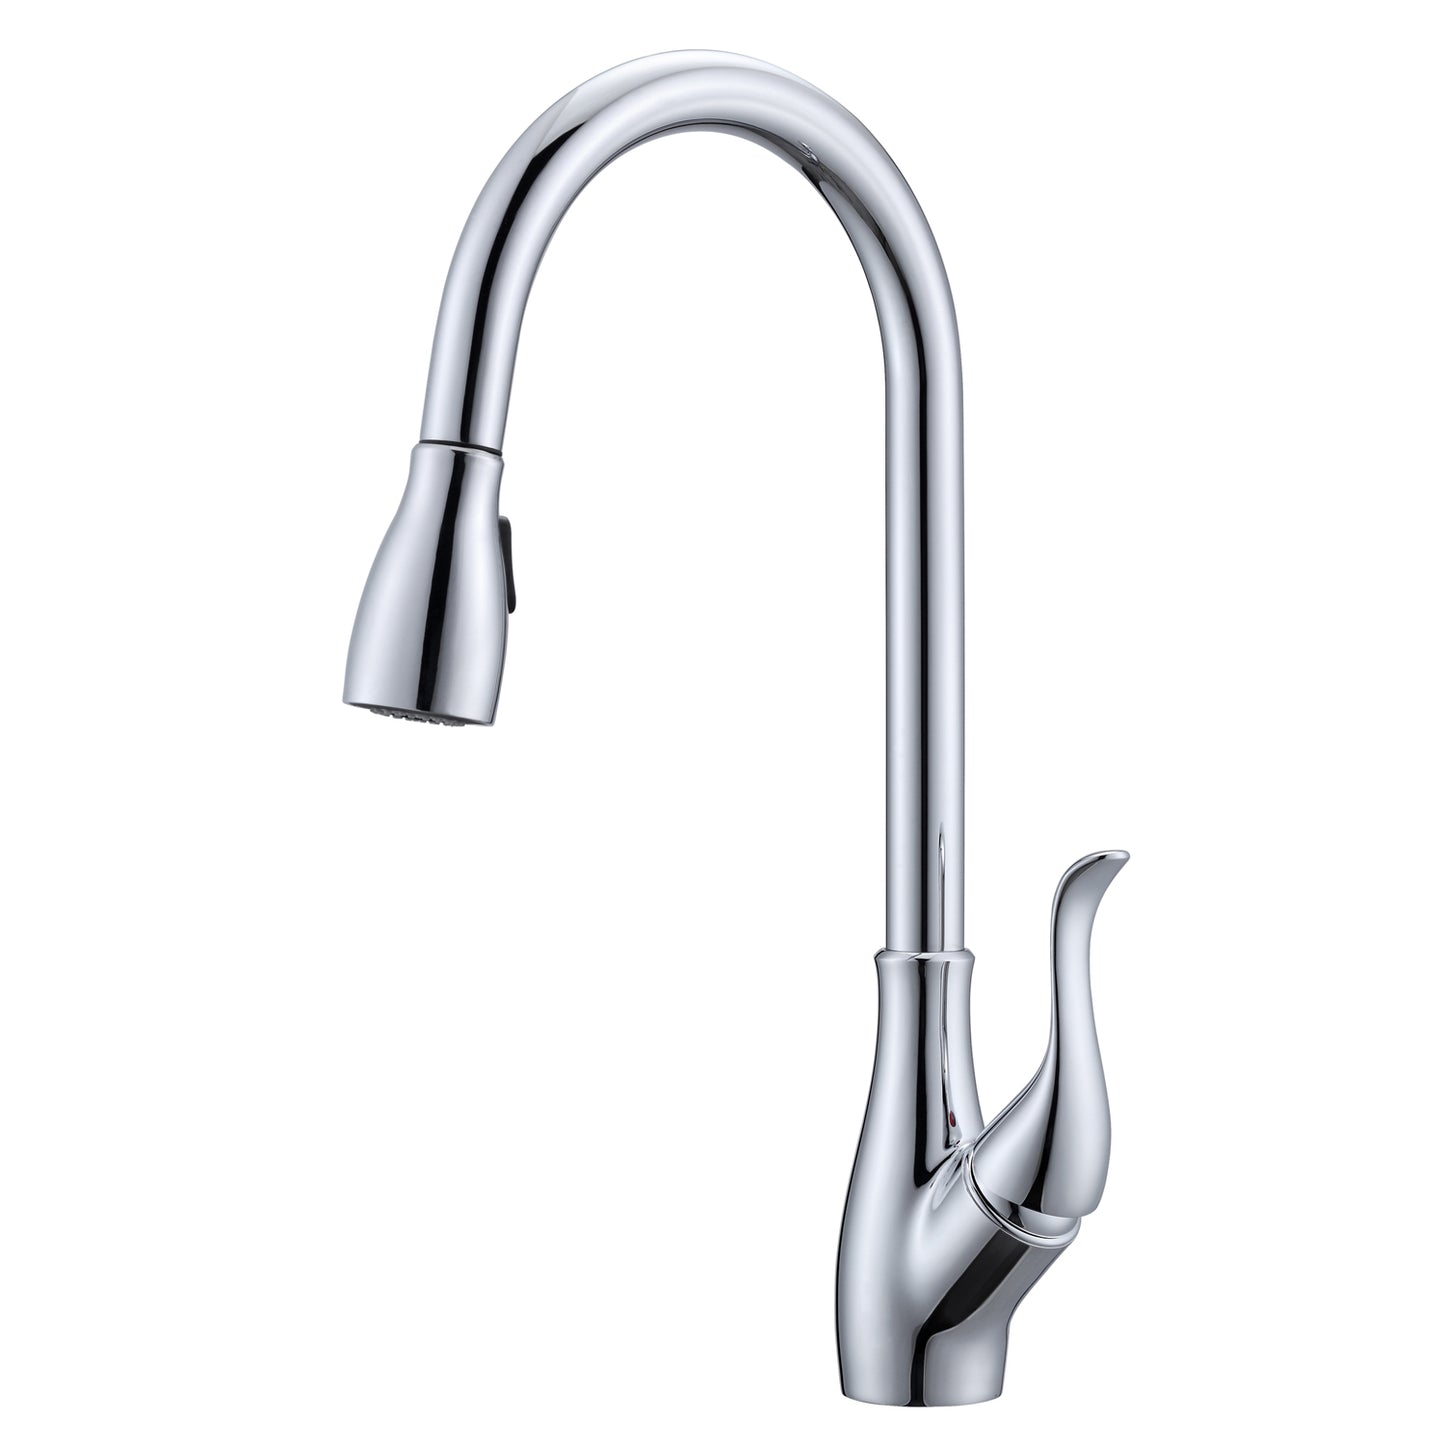 Casoria Pull-down Kitchen Faucet with Hose, Polished Chrome